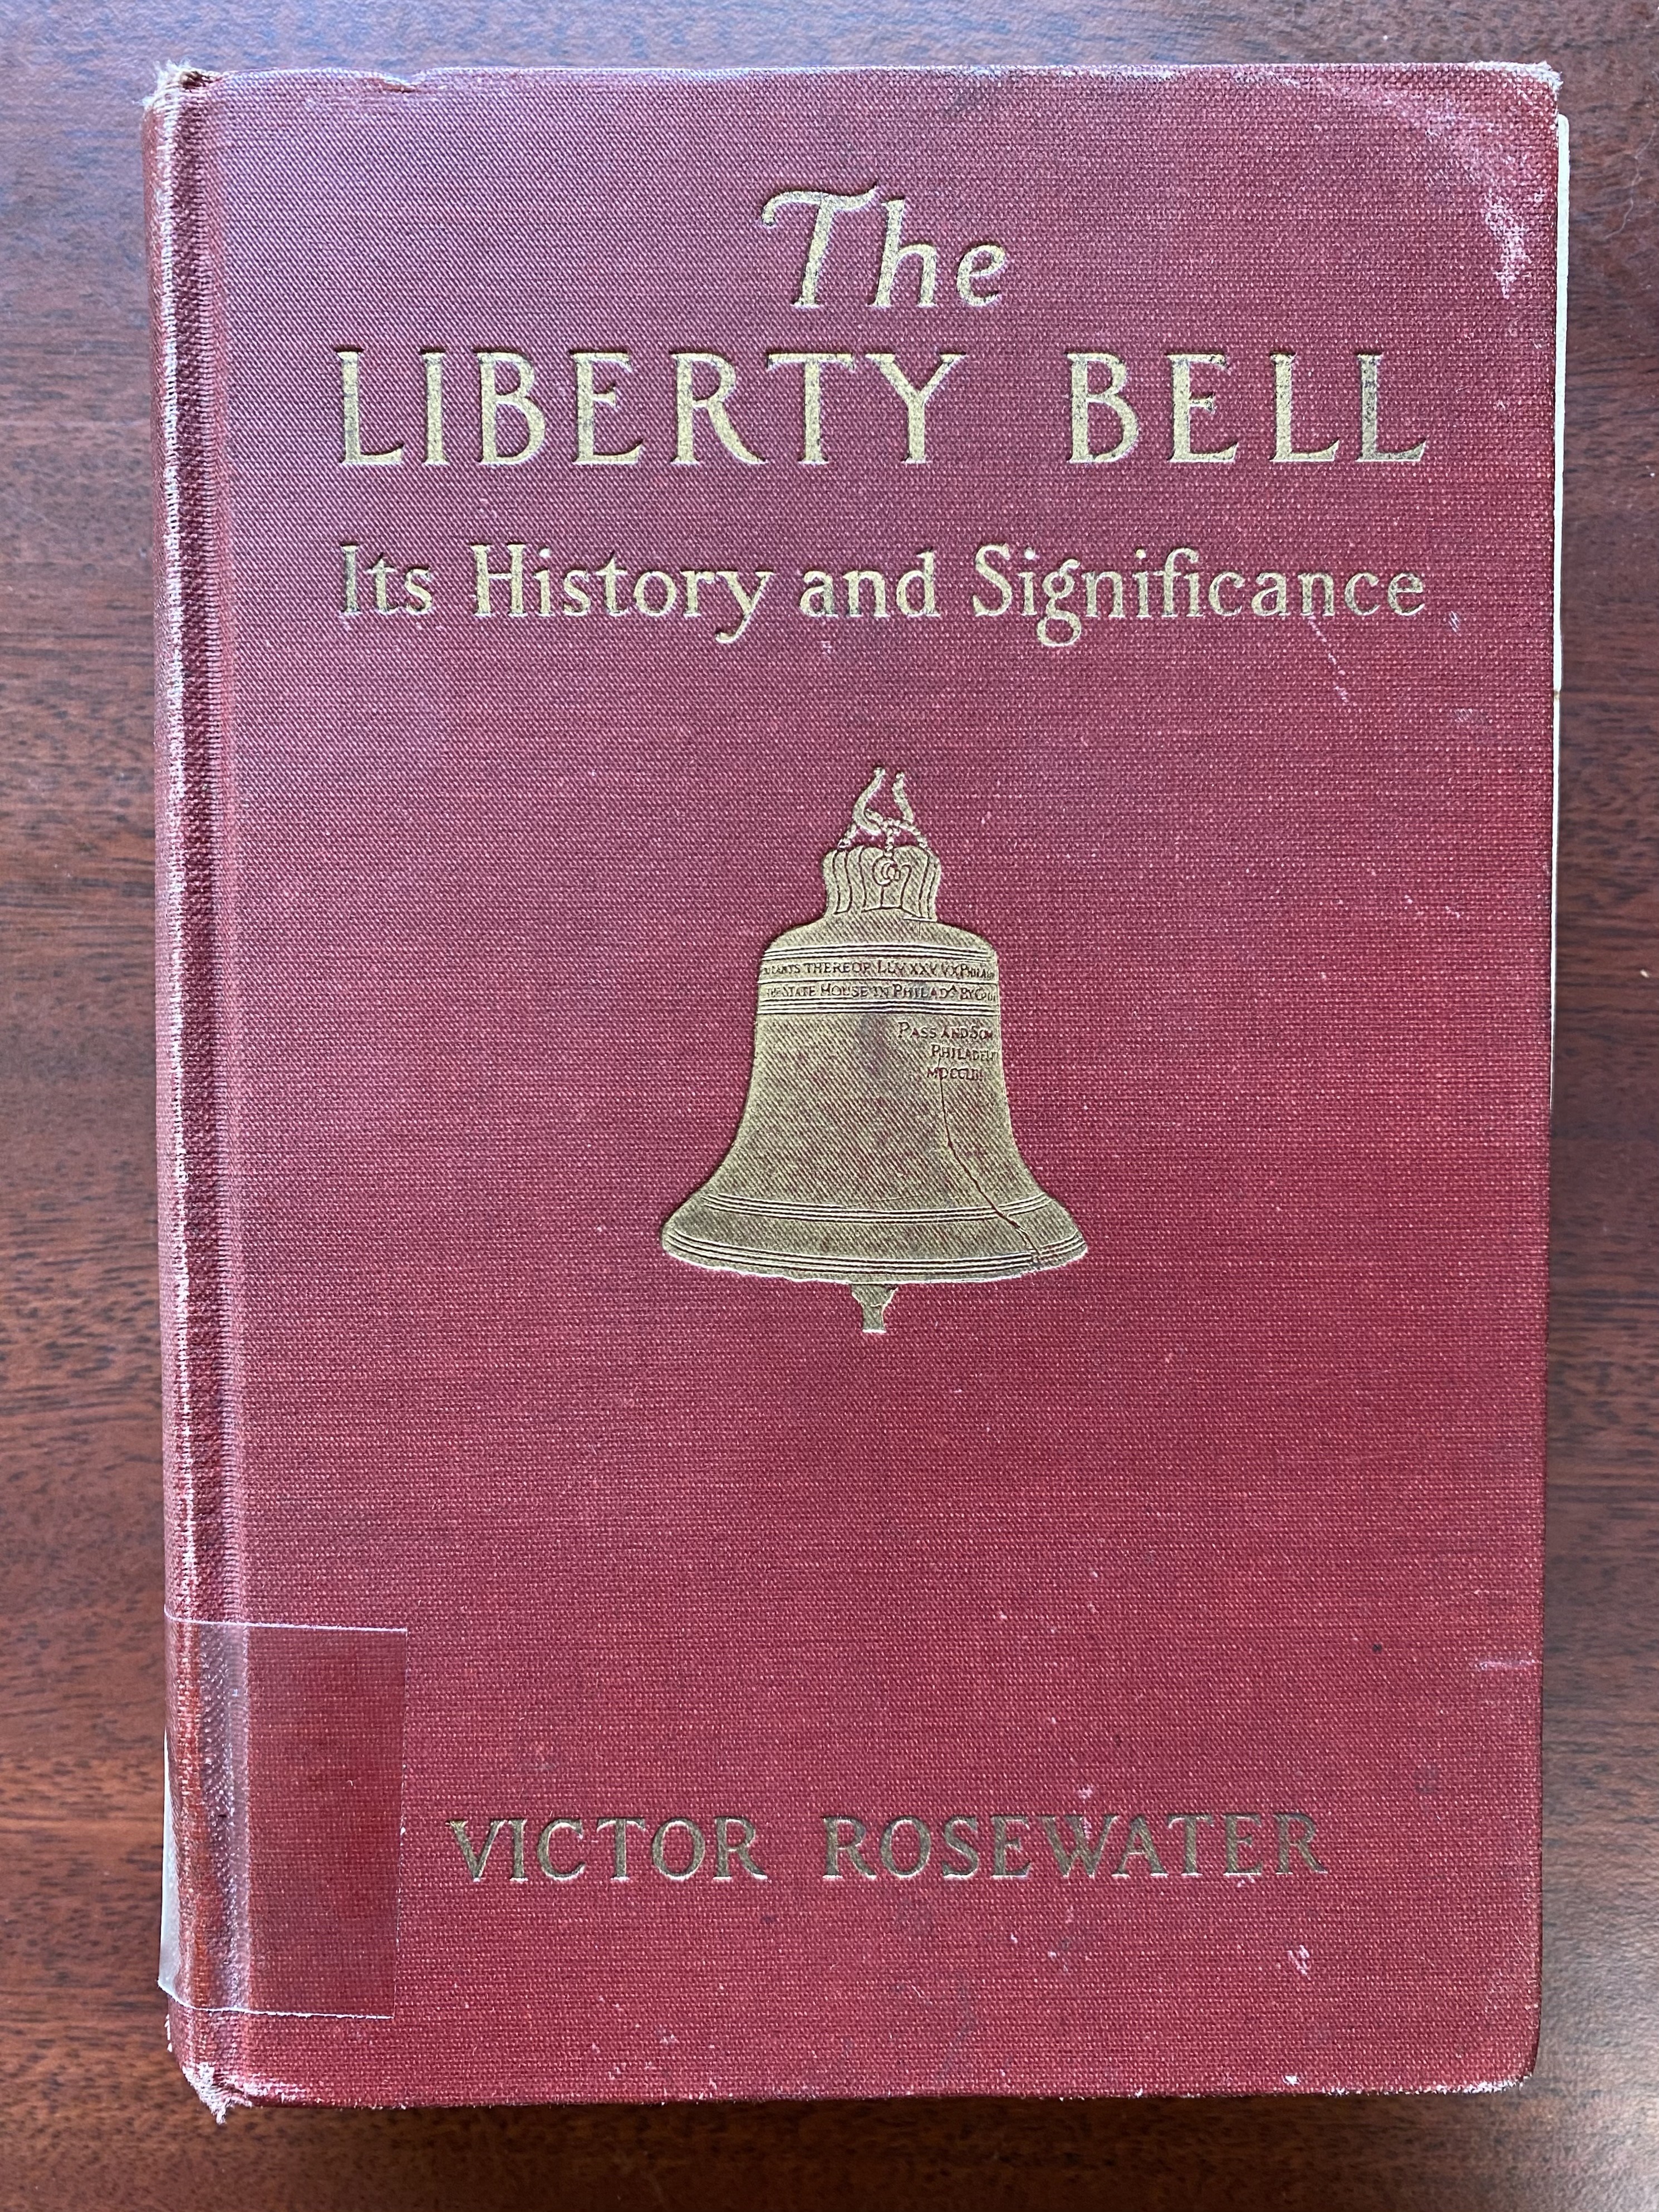 photo of red cover of "The Liberty Bell" with gold type and image of bell